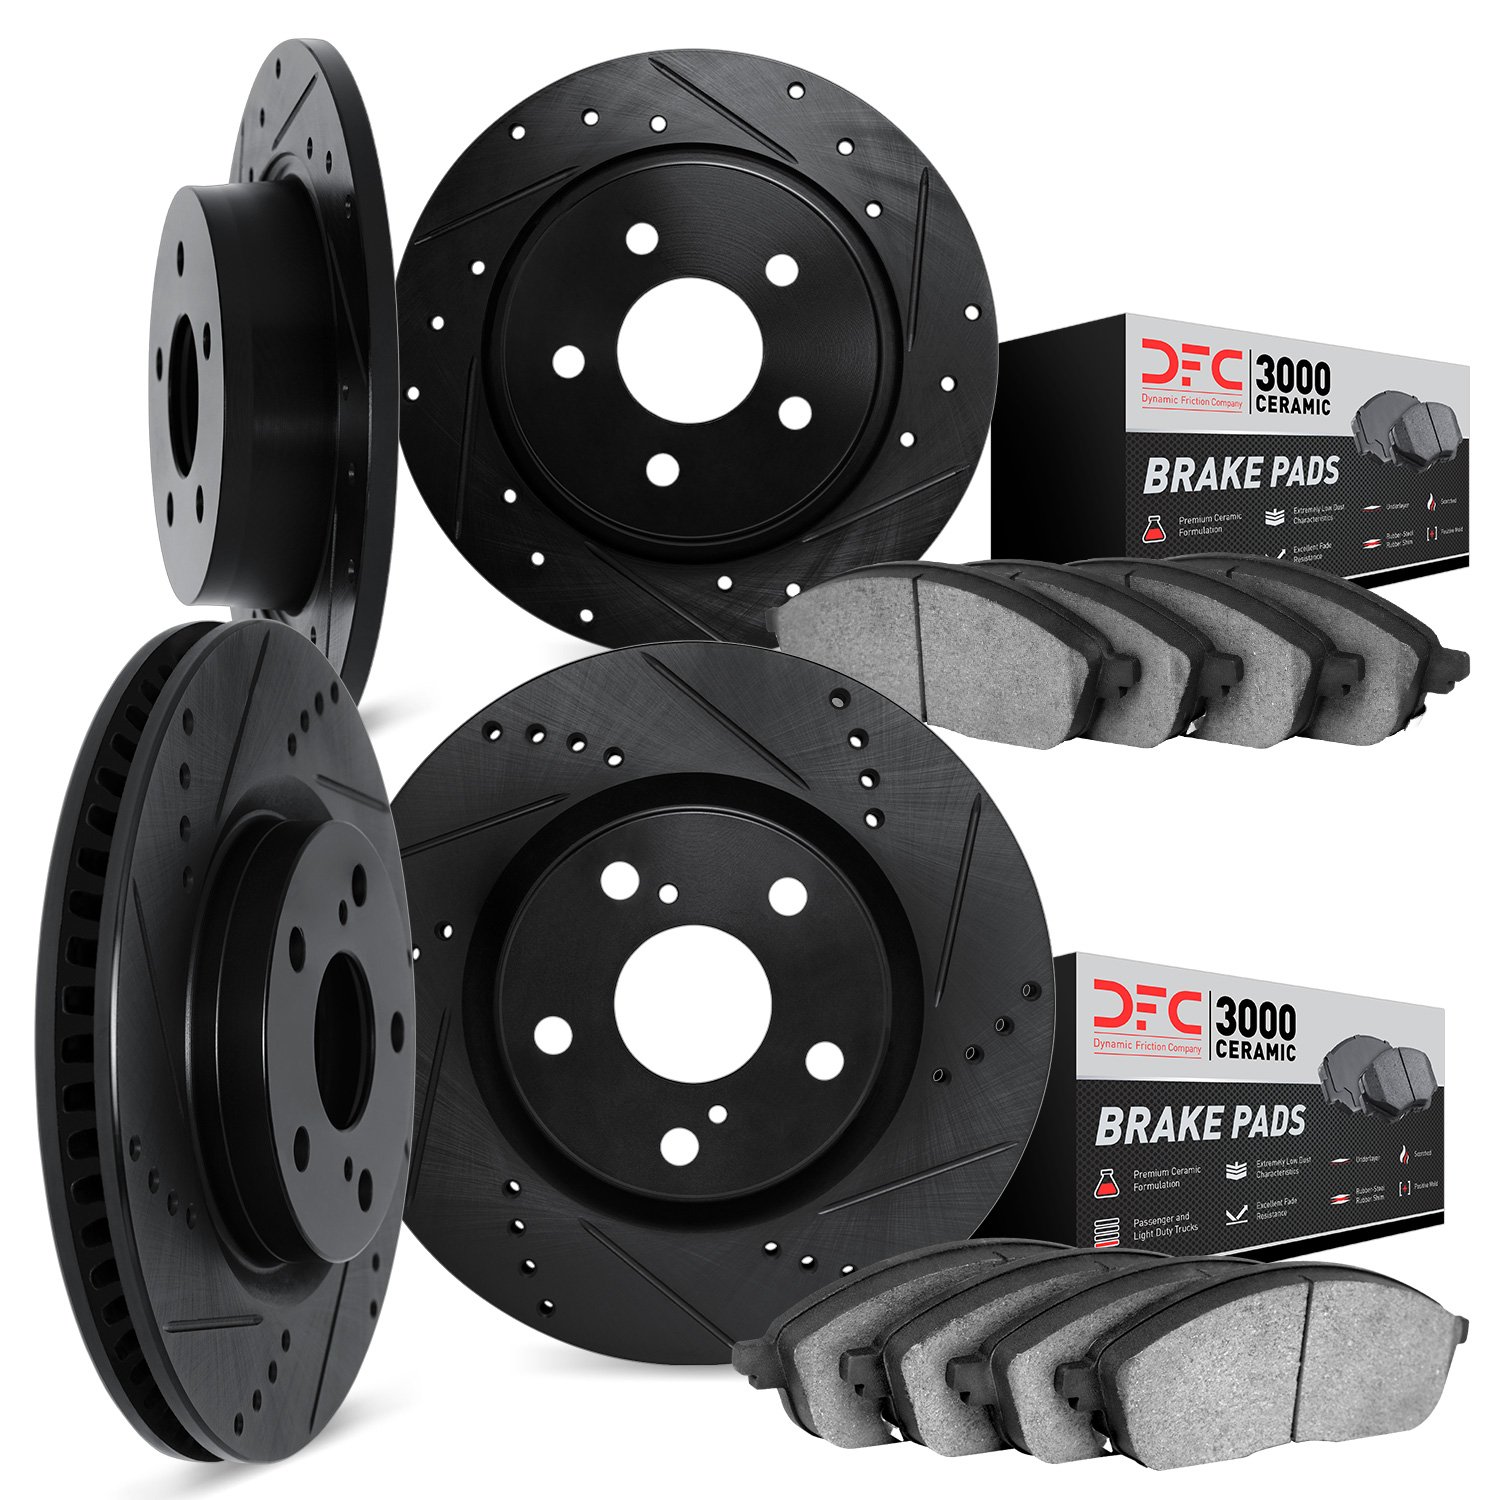 8304-42007 Drilled/Slotted Brake Rotors with 3000-Series Ceramic Brake Pads Kit [Black], 2005-2010 Mopar, Position: Front and Re